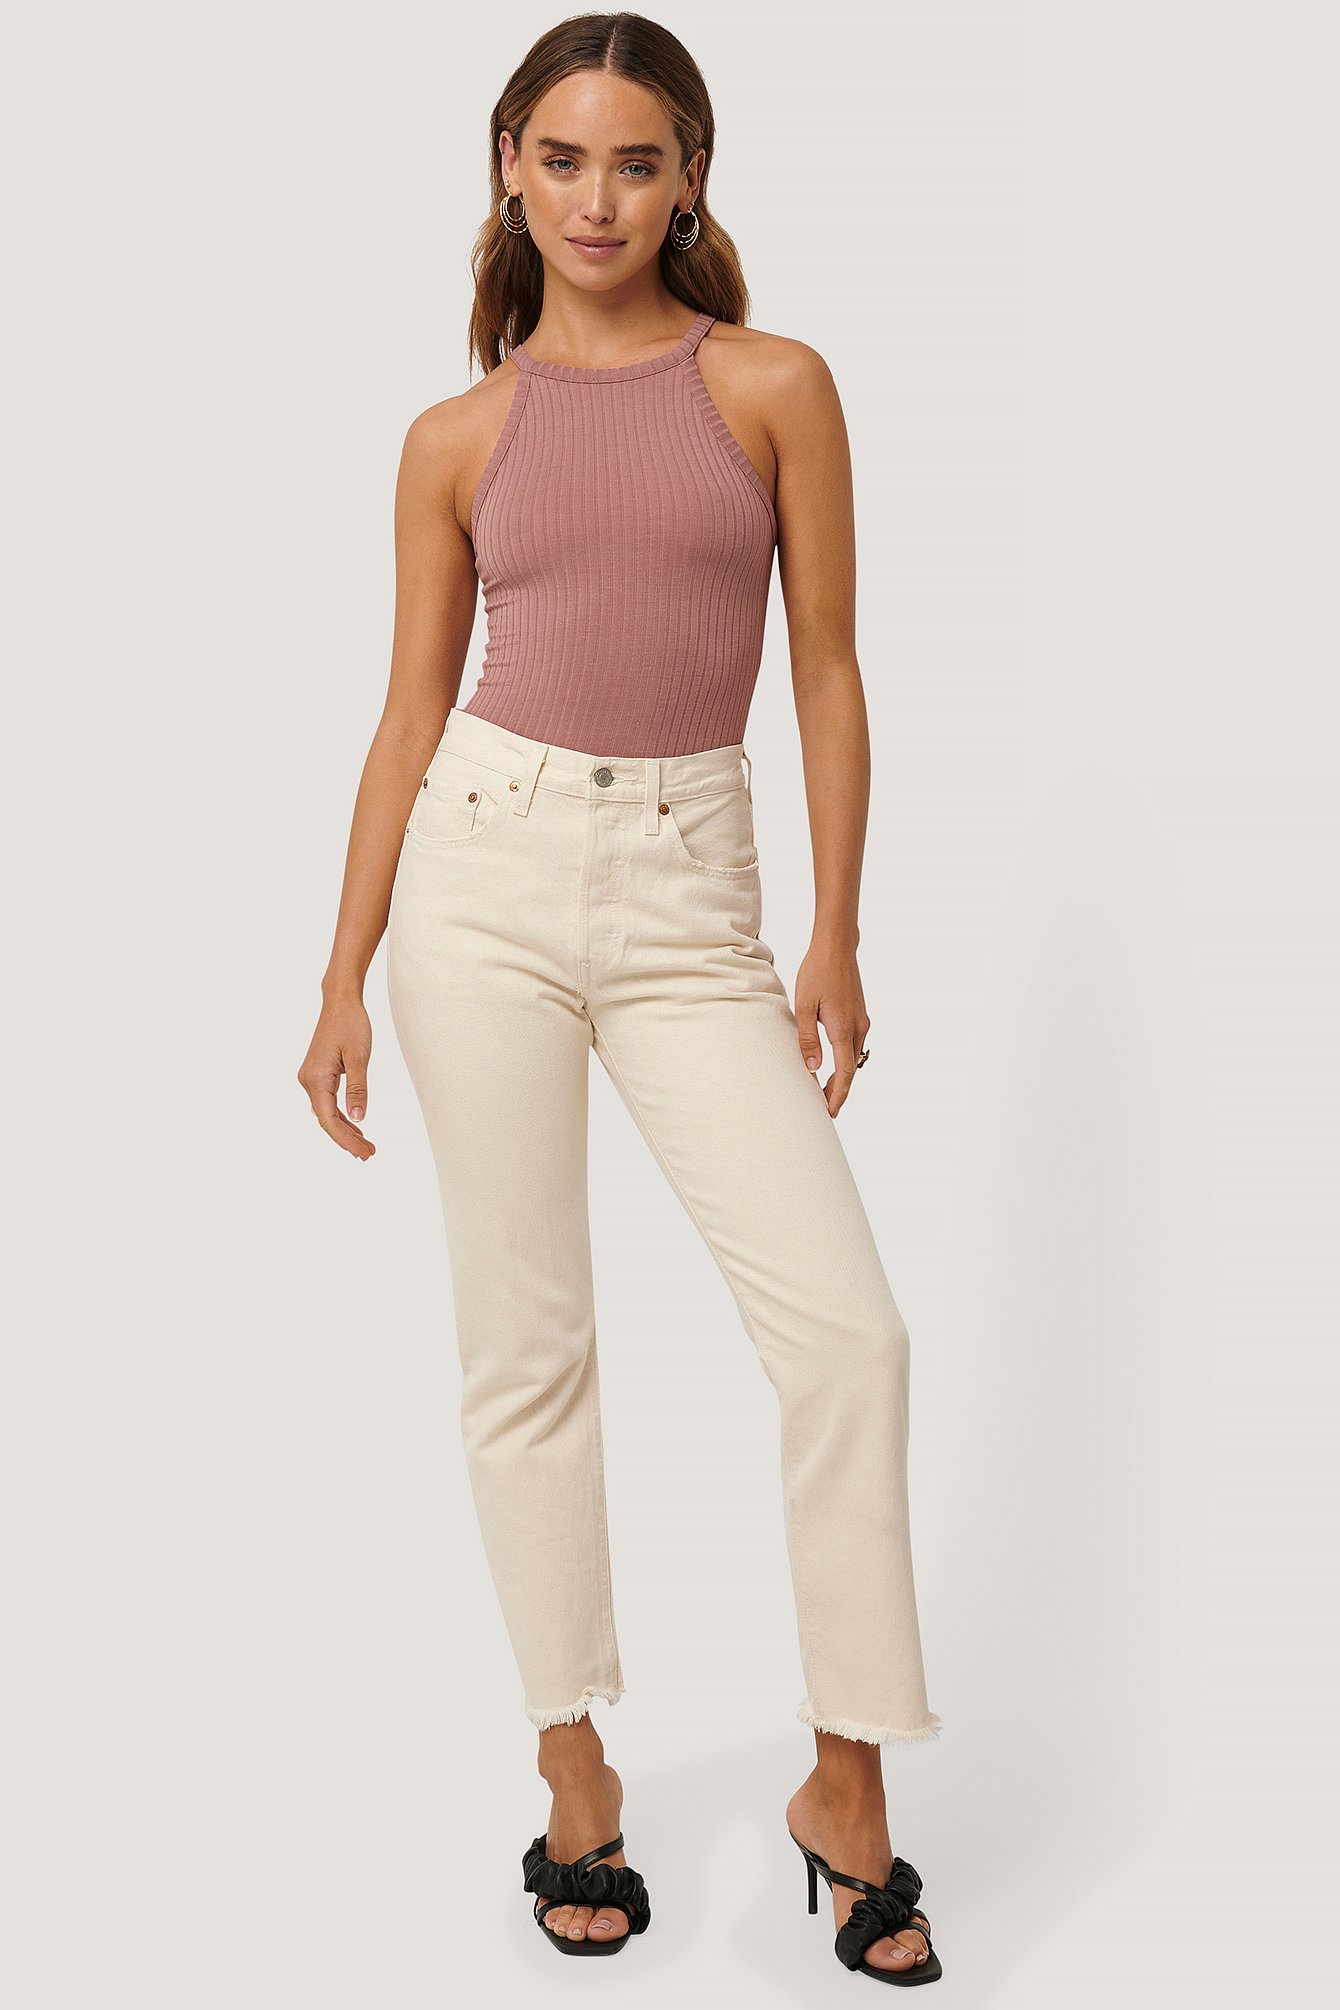 High Neck Ribbed Body with Jeans.